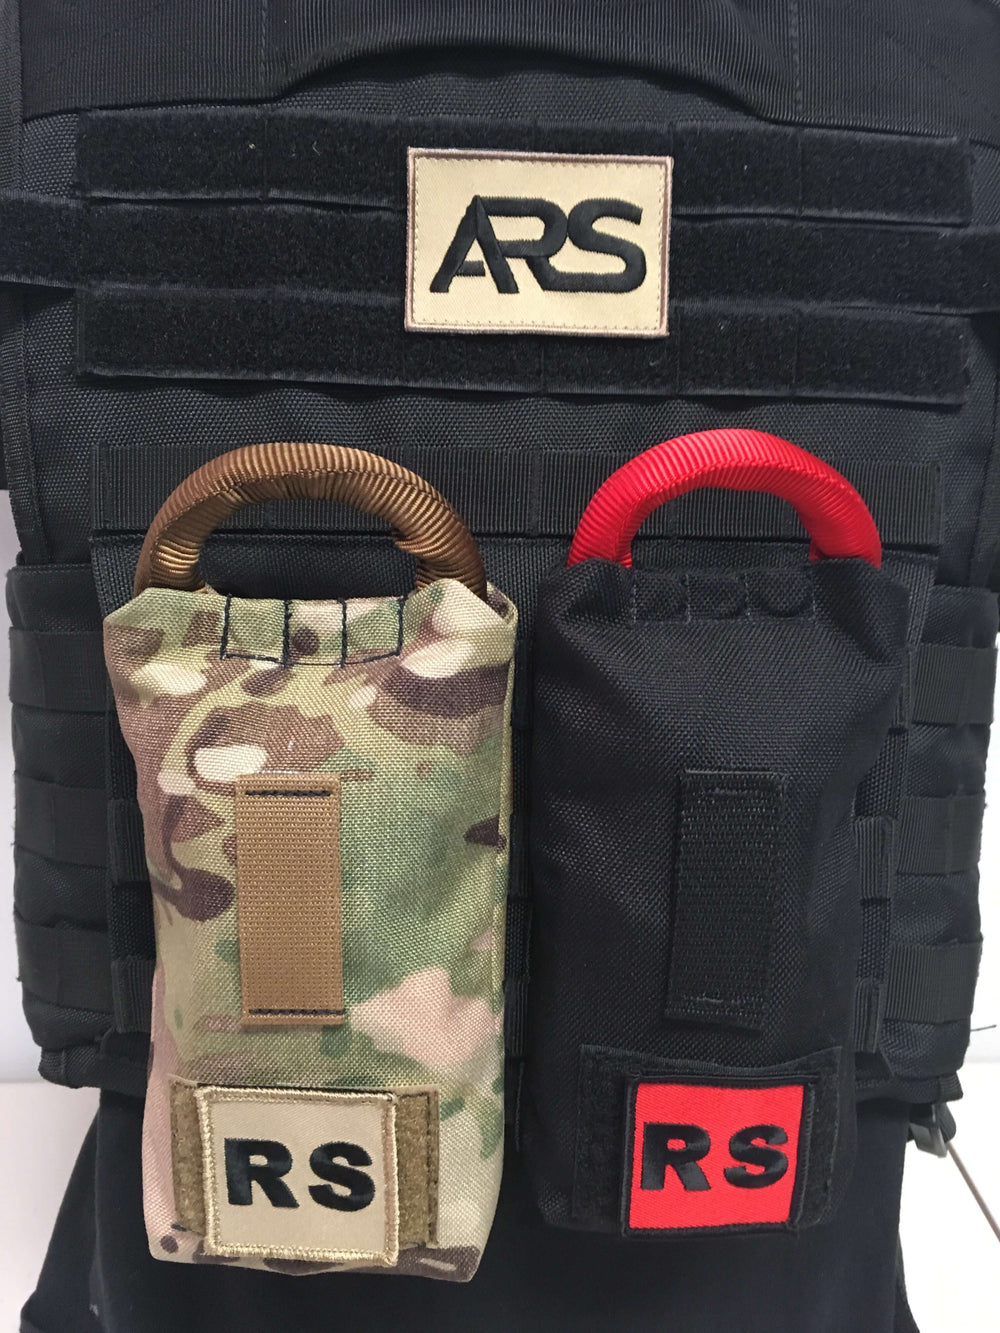 ARS Multi-Loop Rescue Strap with Carabiner